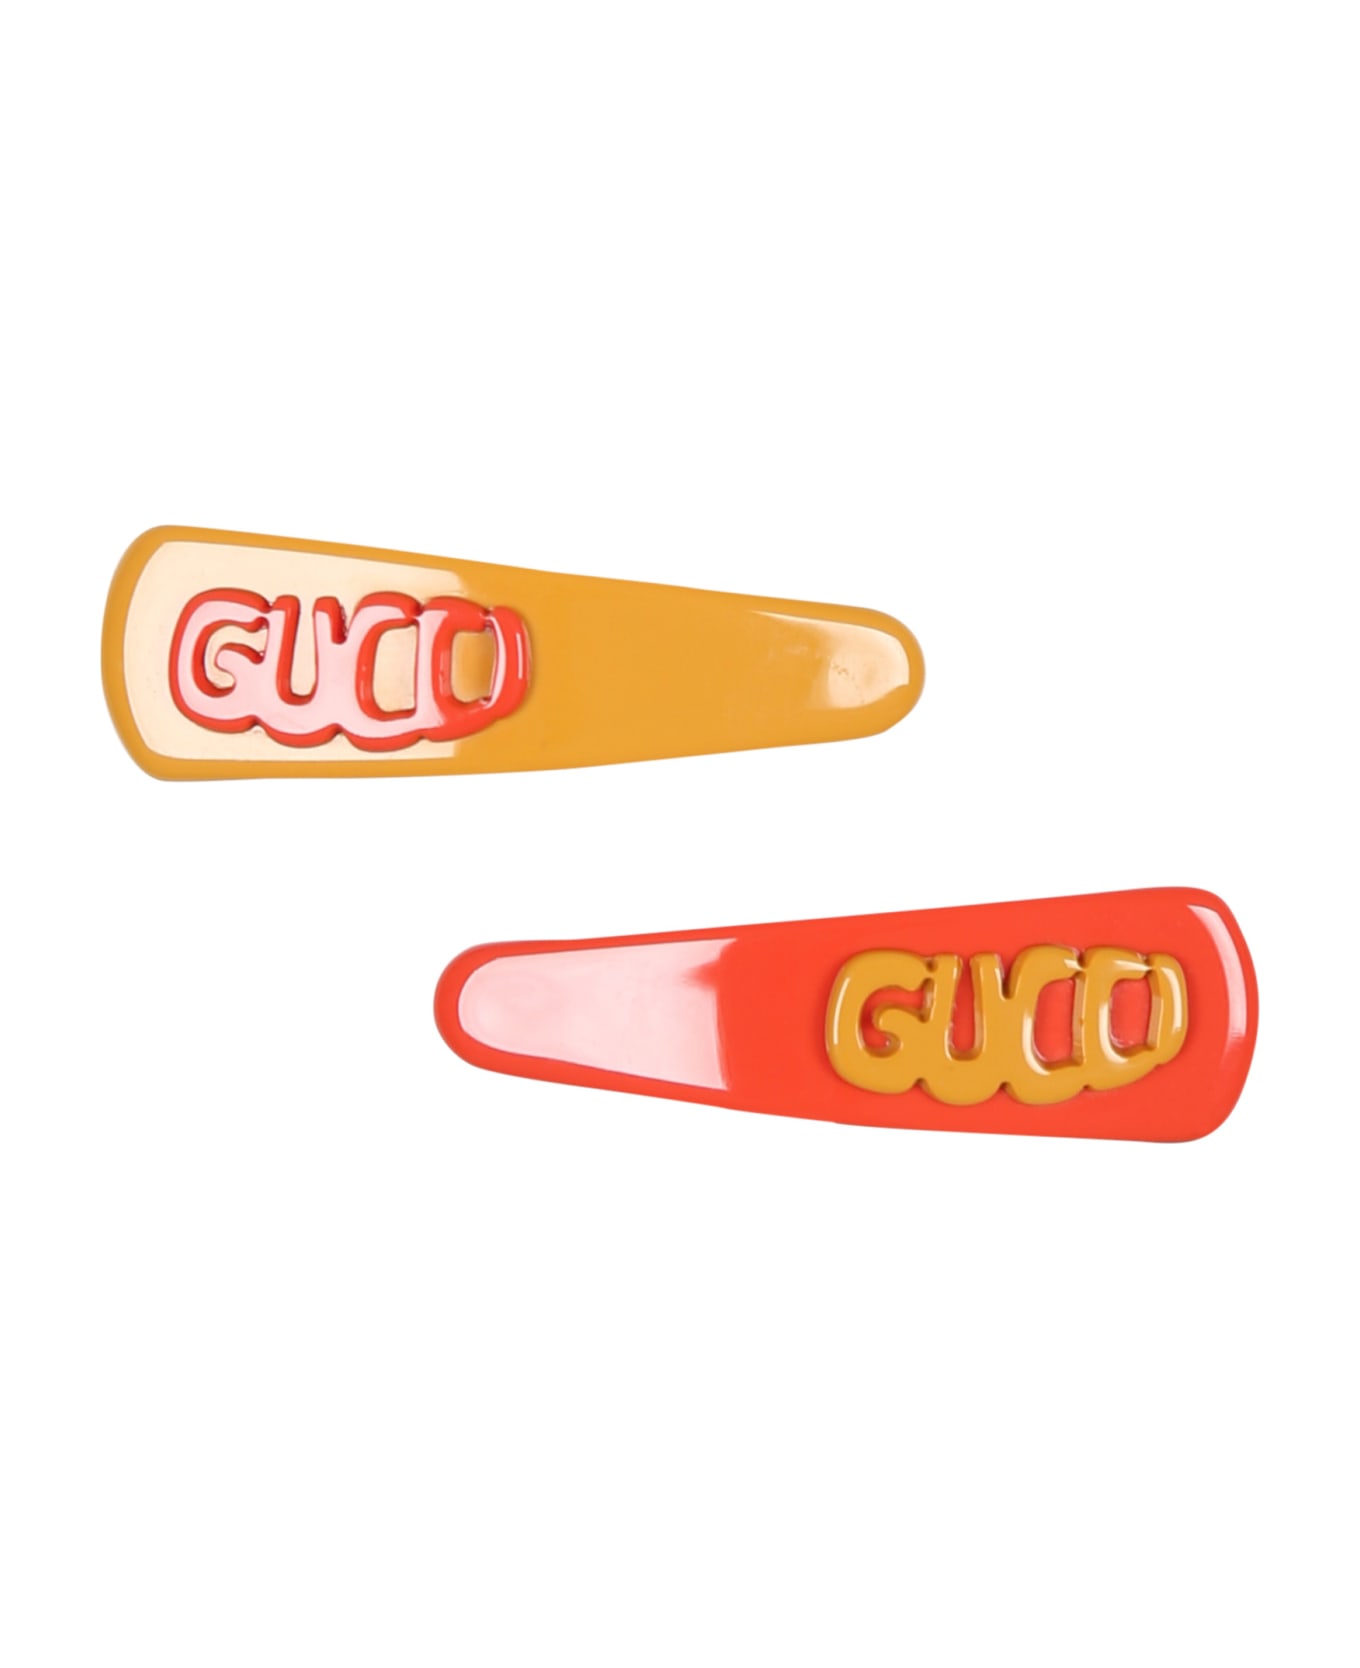 Gucci Pair Of Multicolor Hair Clips For Girl - Multicolor アクセサリー＆ギフト